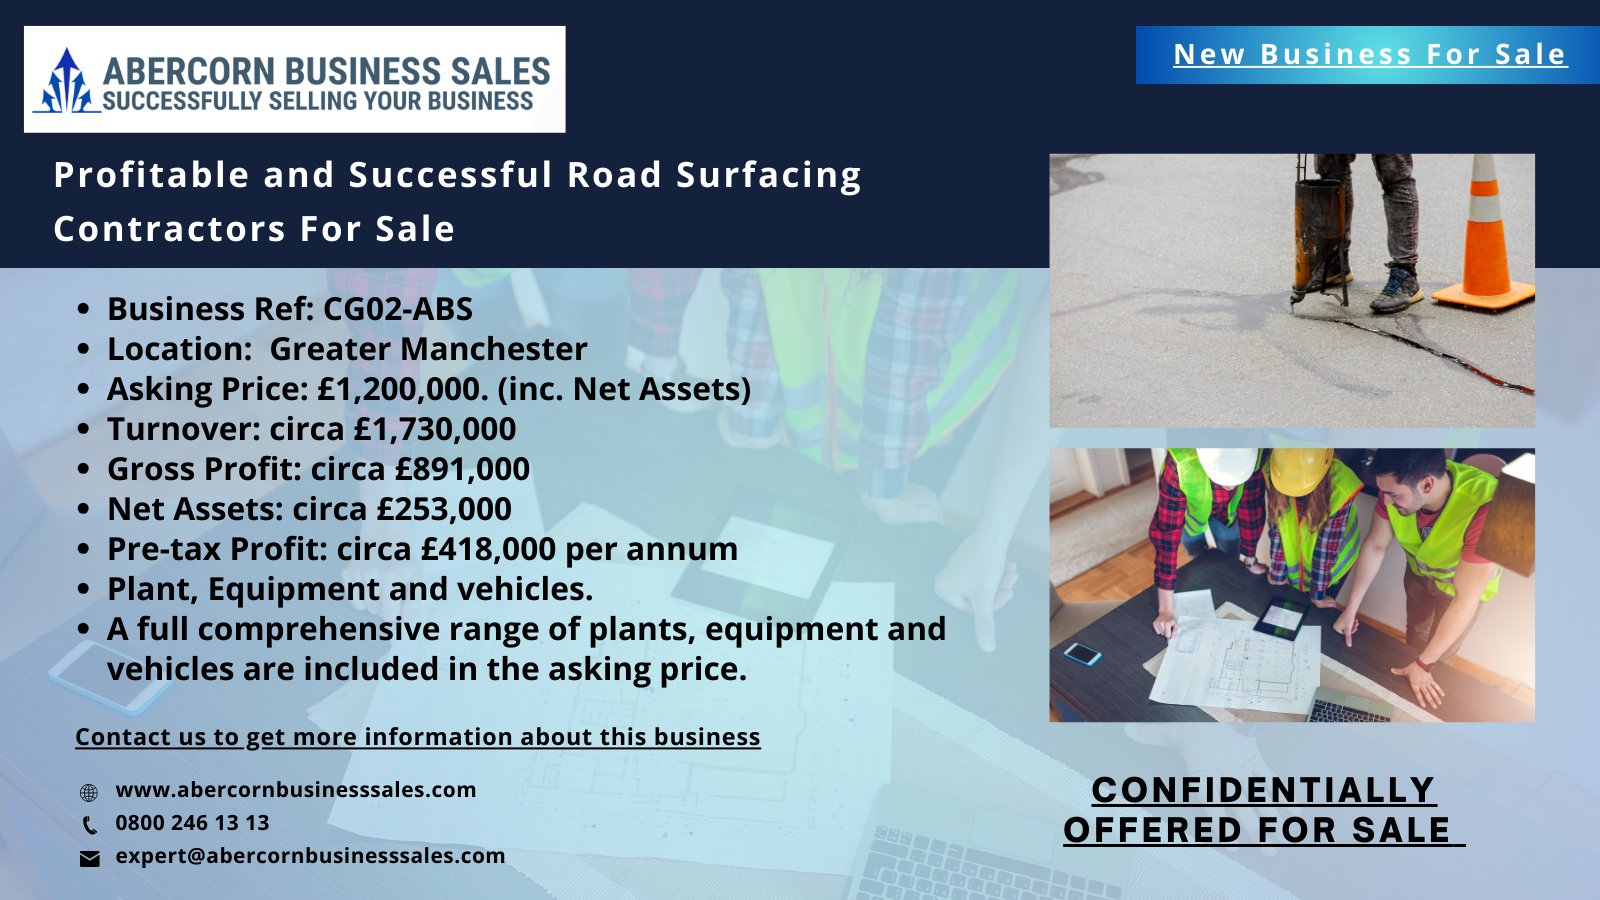 CG02-ABS - Profitable and Successful Road Surfacing Contractors For Sale